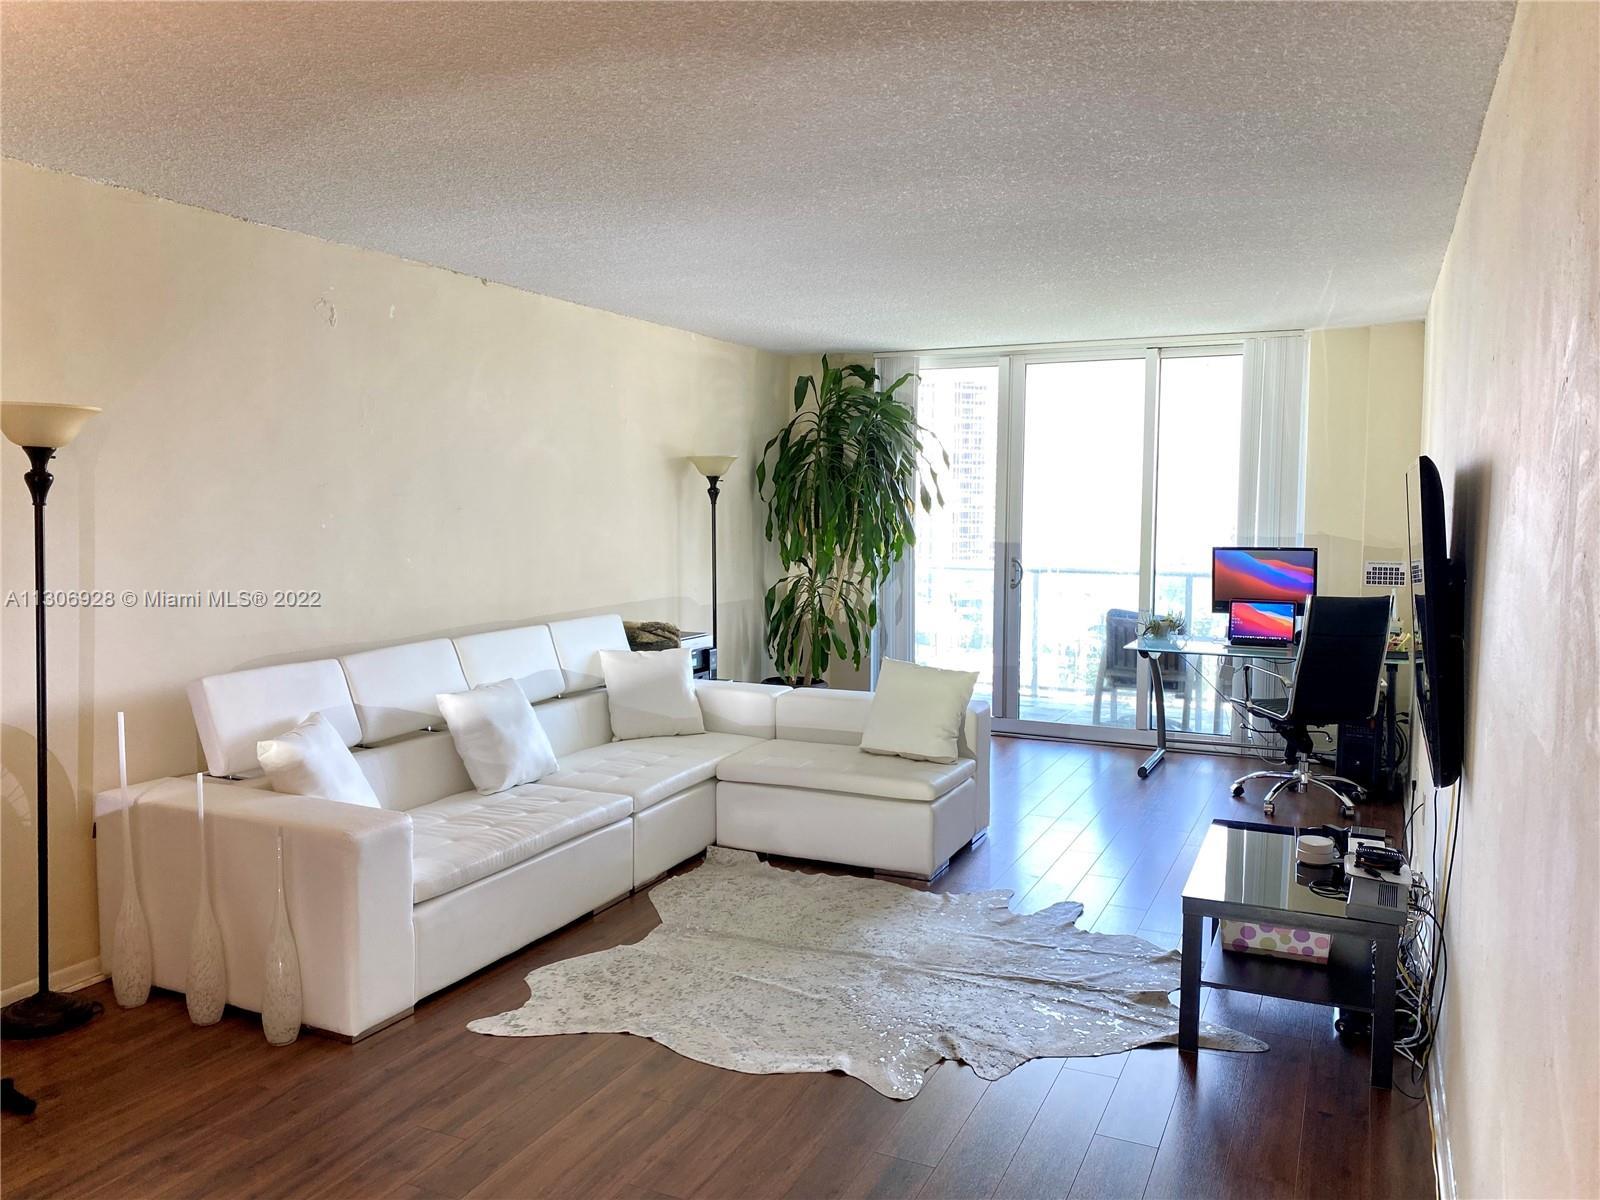 AMAZING 1/1 UNIT WITH AMAZING VIEWS & AMENITIES. EVERYTHING INCLUDED , WATER, CABLE, WIFI. Excellent